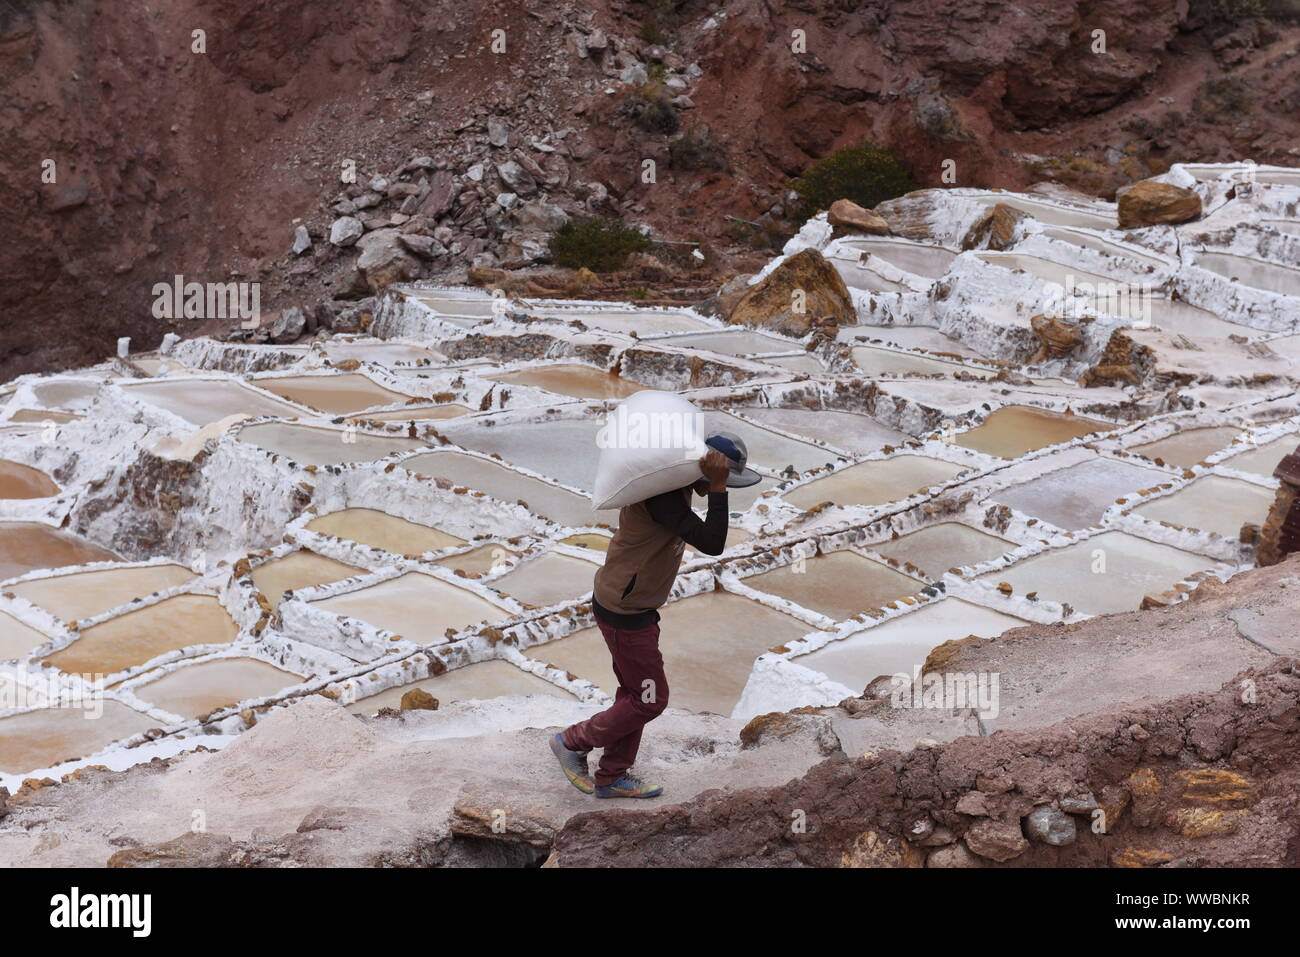 Maras, Peru. 14th Sep, 2019. A worker is seen hauling salt at Salineras de Maras.The Salineras de Maras is located along the slopes of QaqawiÃ±ay Mountain, at an elevation of 3,380 m in the Urumbamba Valley, near the town of Maras. It is made up of more than 3 thousand natural salt wells. Each of the wells has a dimension of 5 square meters. The 3,000 pools are fed by an underground hypersaline spring that originated around 110 million years ago during the formation of the Andes Mountains. The most of villagers of Maras work here. Credit: John Milner/SOPA Images/ZUMA Wire/Alamy Live News Stock Photo